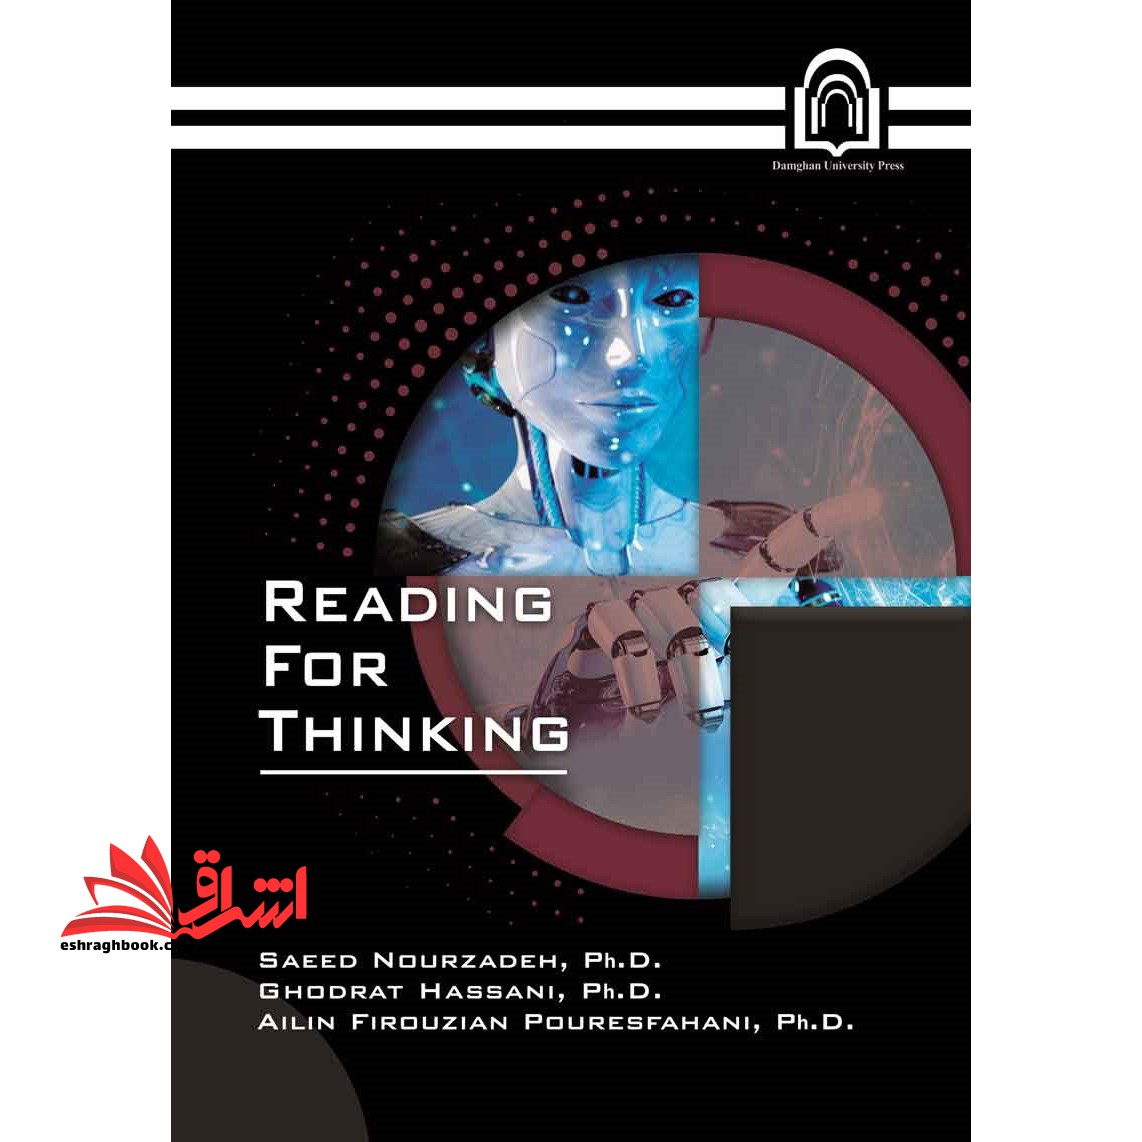 READING FOR THINKING